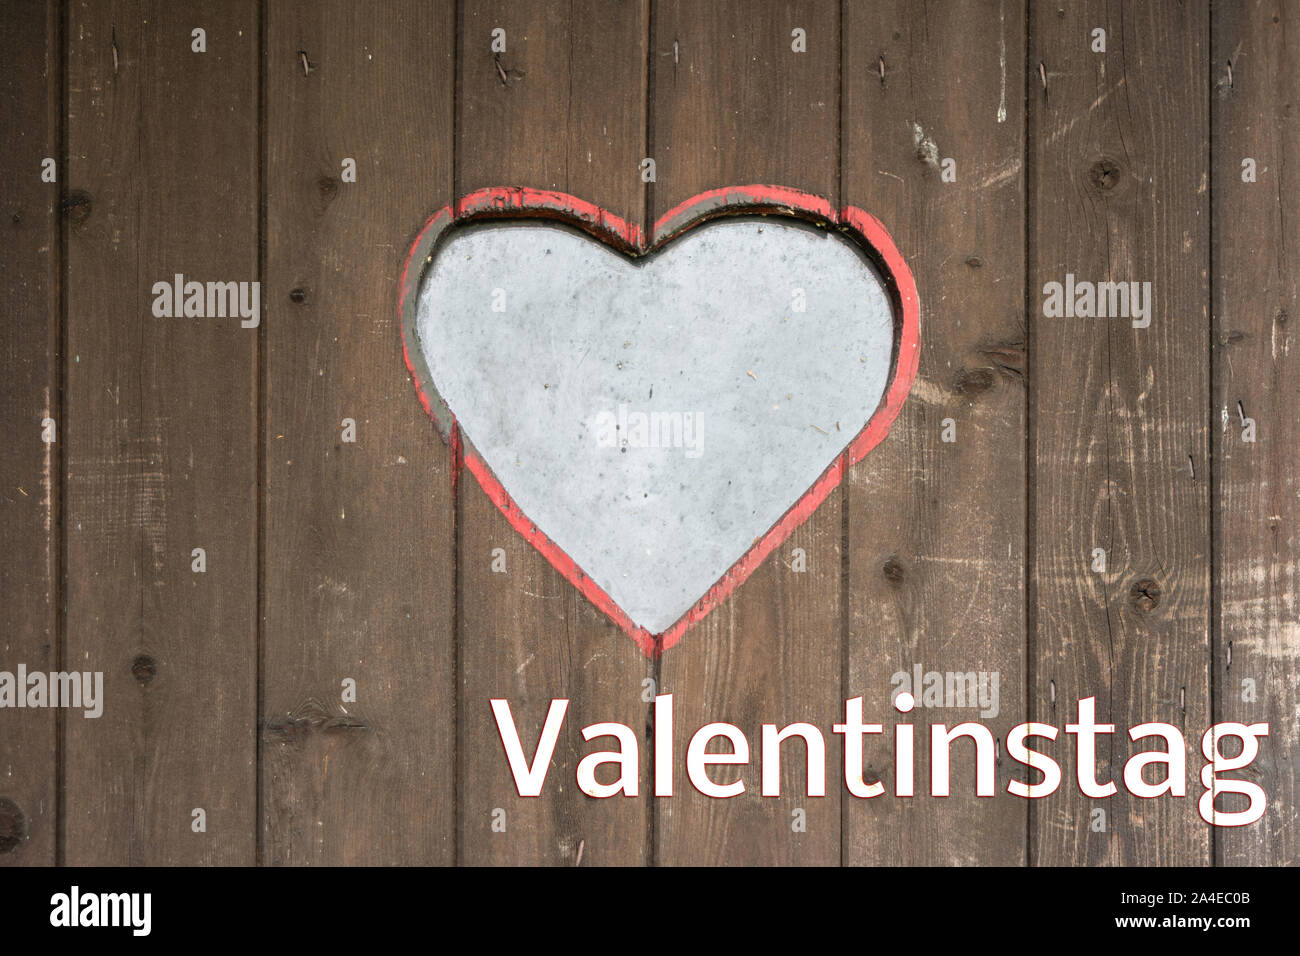 Germany 'Valentinstag' Wooden Heart Template Stock Photo